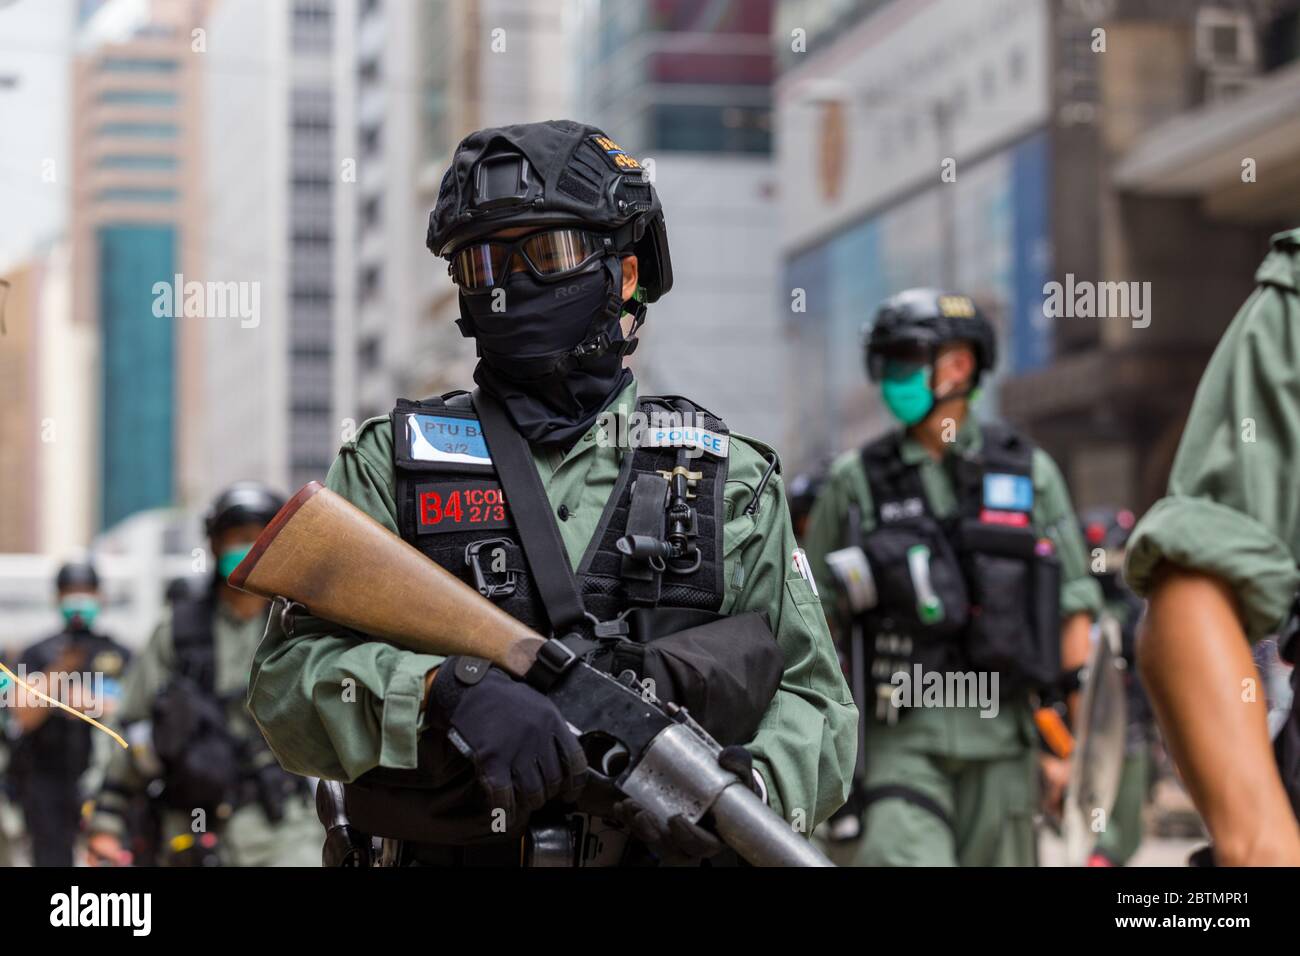 Central, Hong Kong. 27 May, 2020 Hong Kong Protest Anti-National Anthem Law. Police officer carrying the tear gas gun. Credit: David Ogg / Alamy Live News Stock Photo